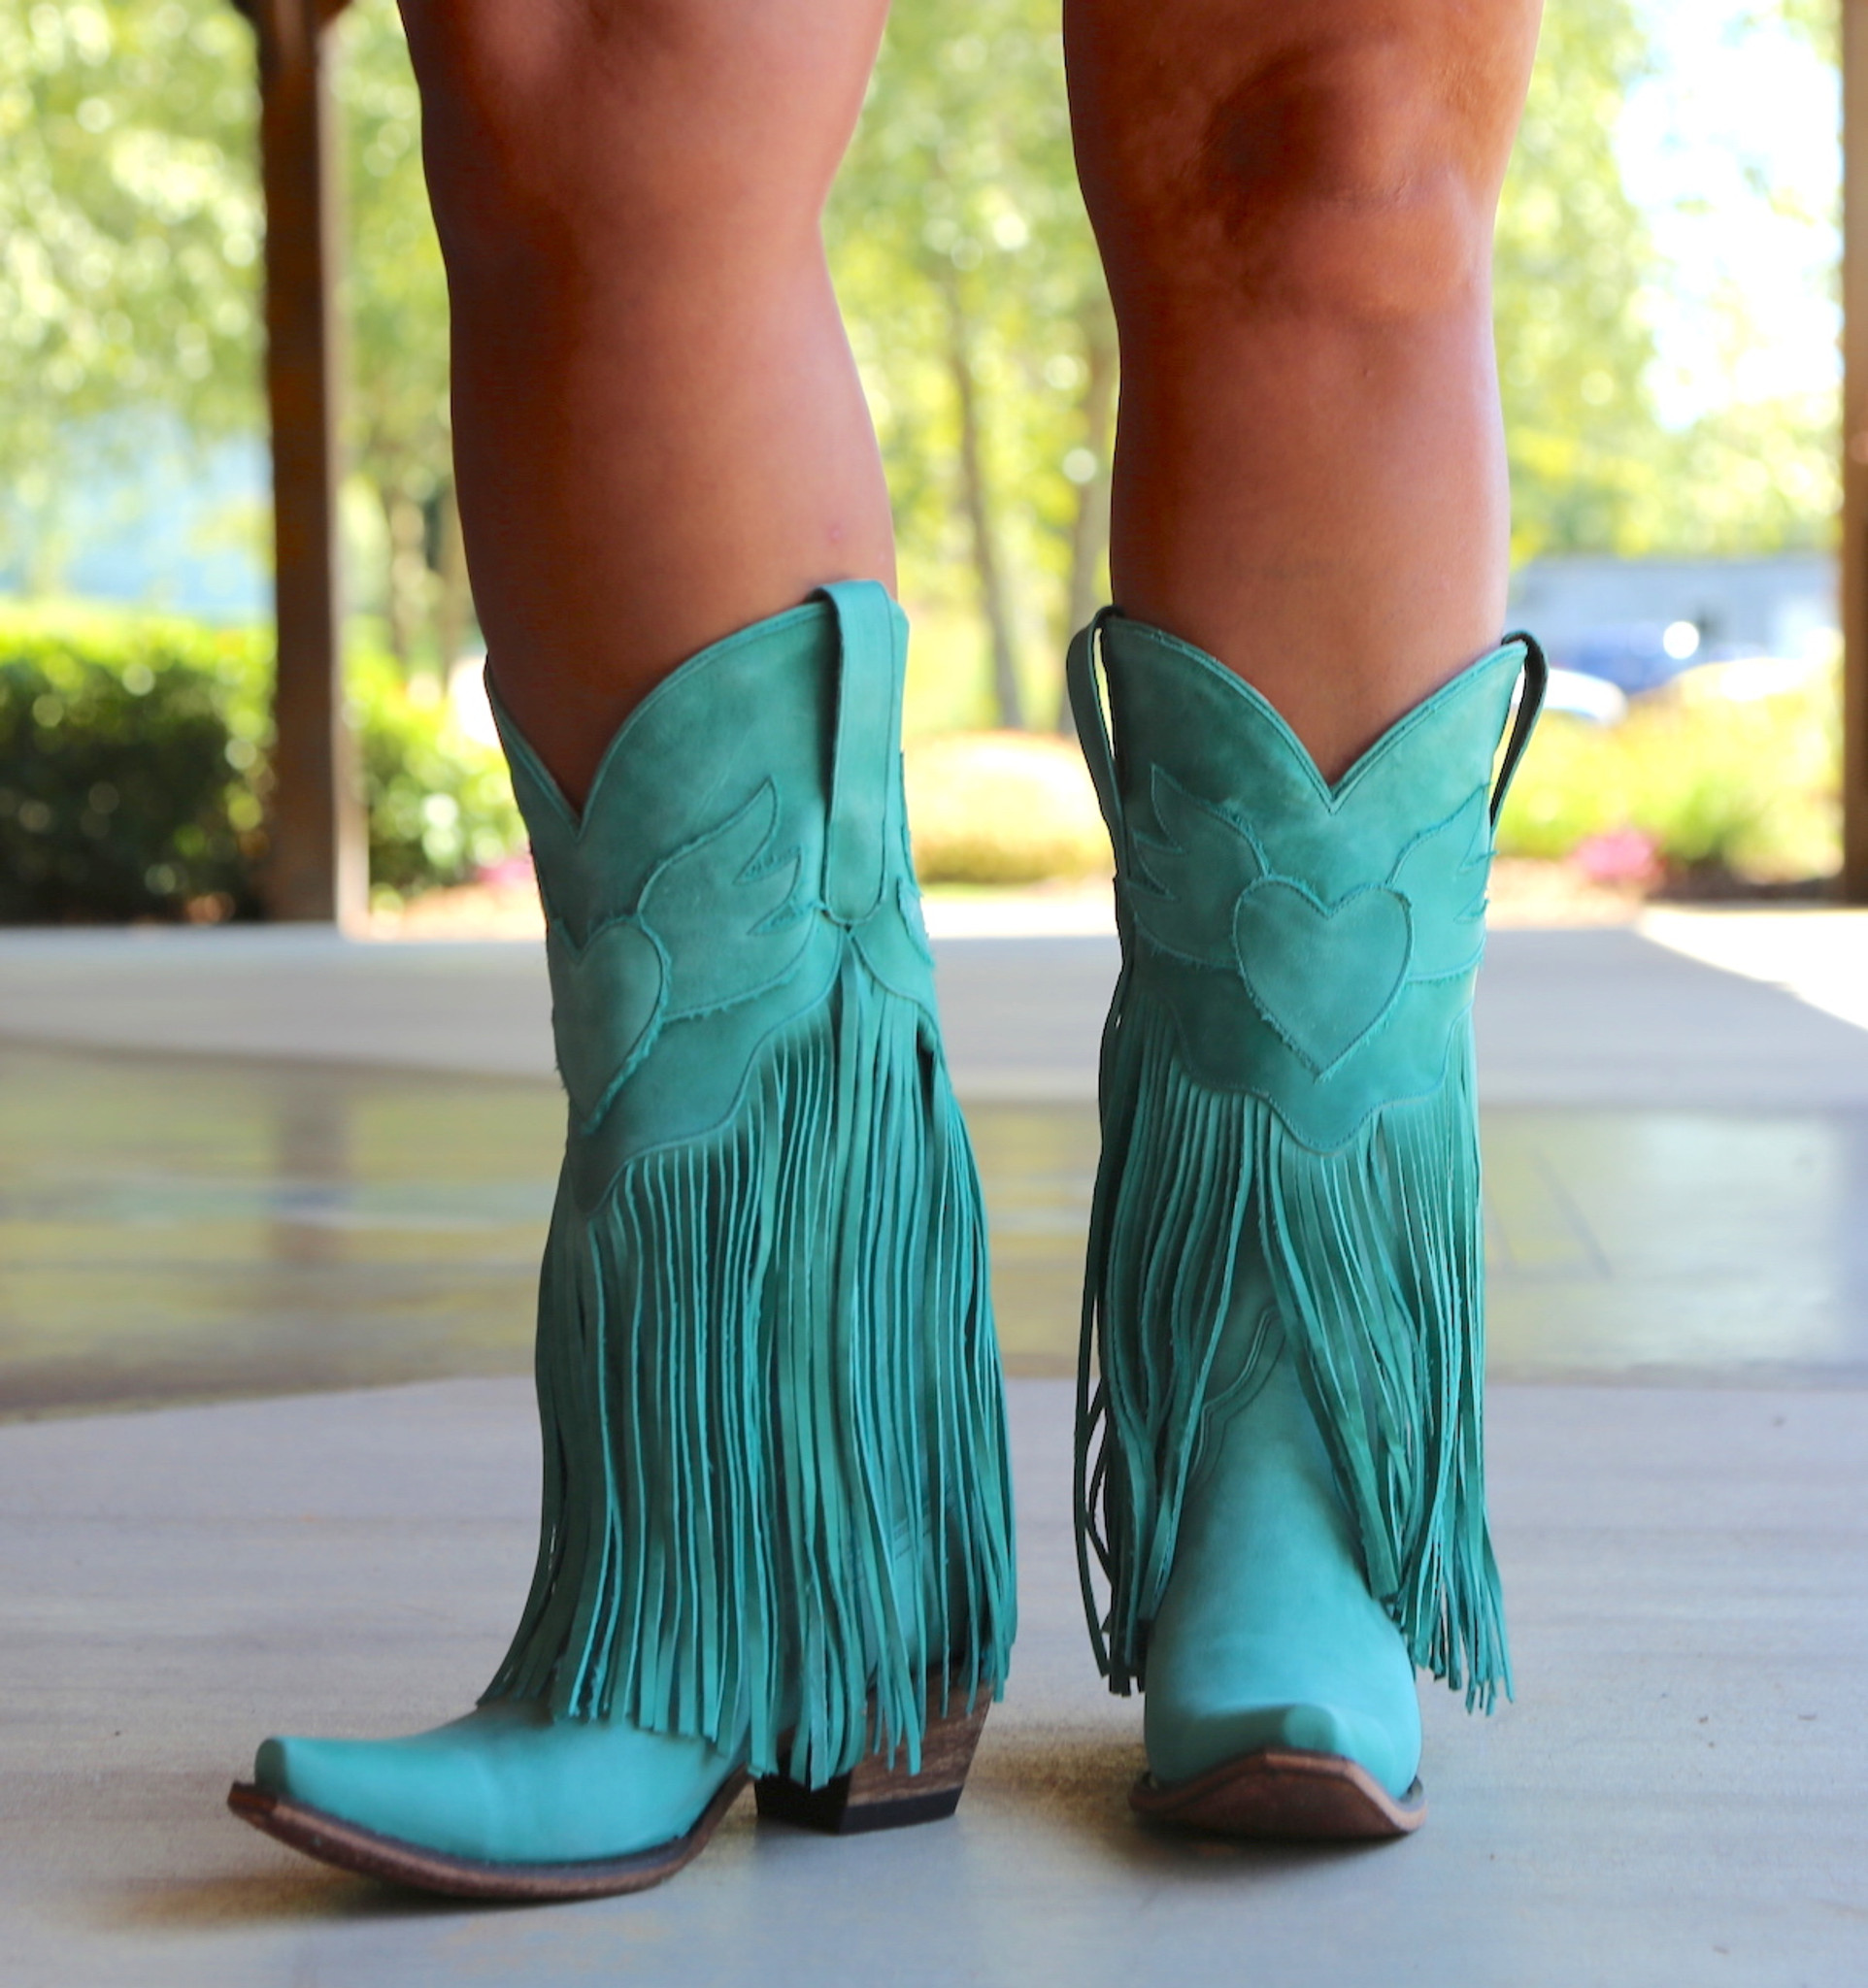 https://cdn11.bigcommerce.com/s-b72d8/images/stencil/2048x2048/products/2731/13445/Junk_Gypsy_by_Lane_Dreamer_Turquoise_Boots_JG0004D_Heart__34815.1567203647.JPG?c=2